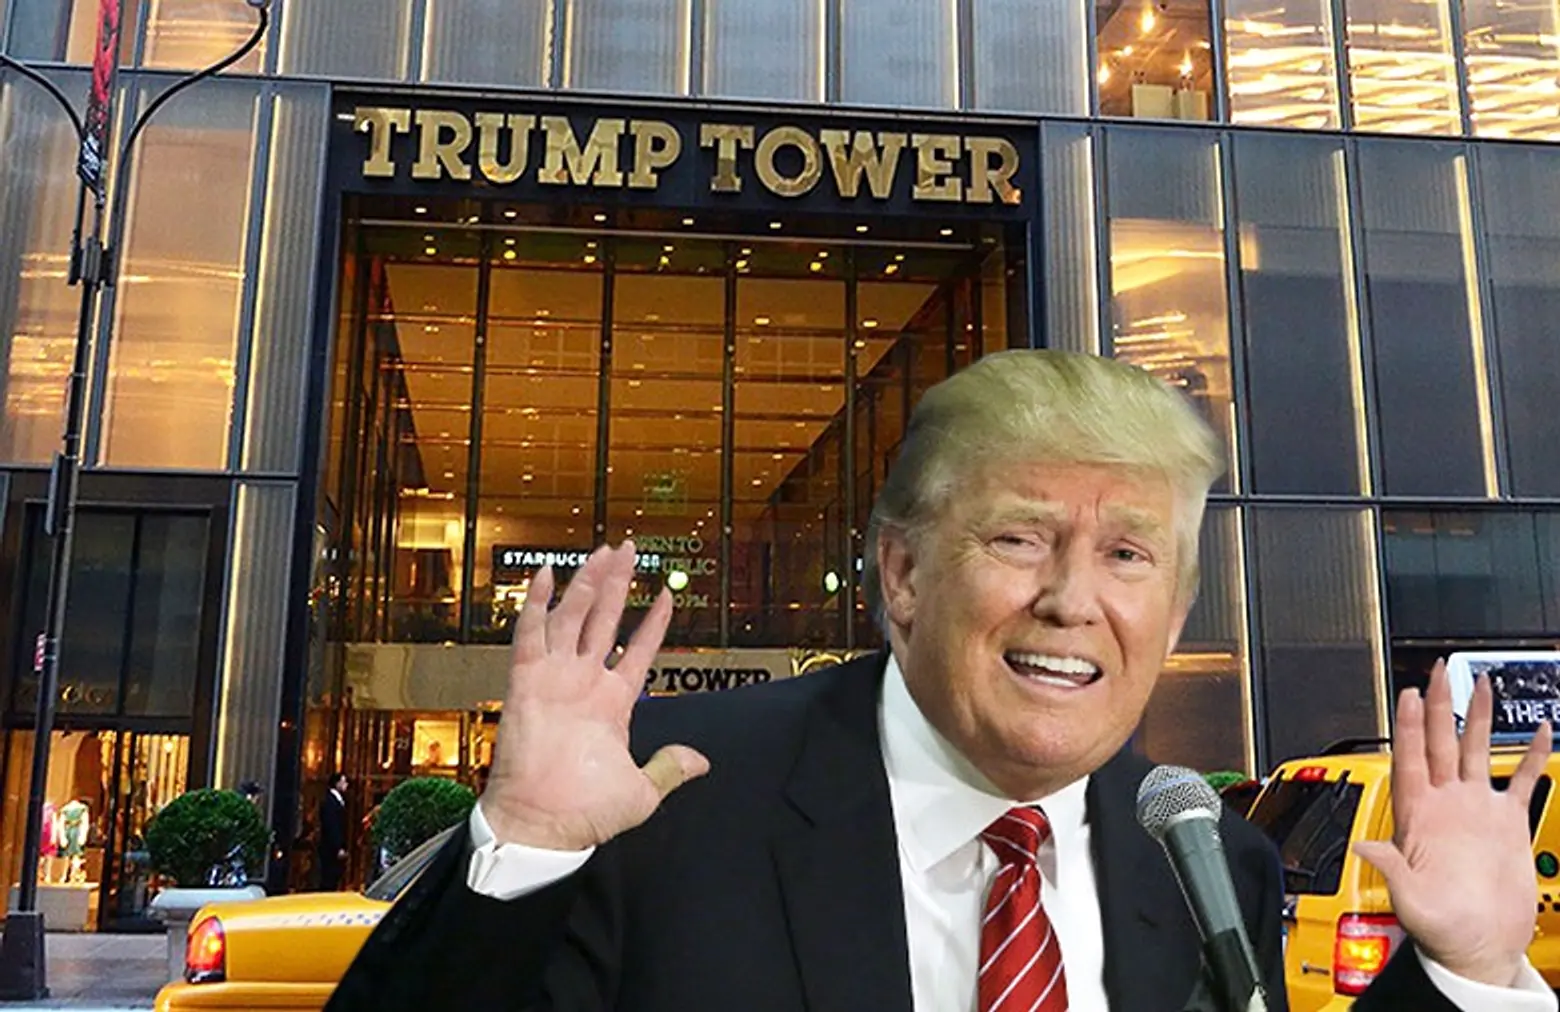 NYPD vetting 30-40 officers with ‘solid records’ for full-time Trump Tower detail